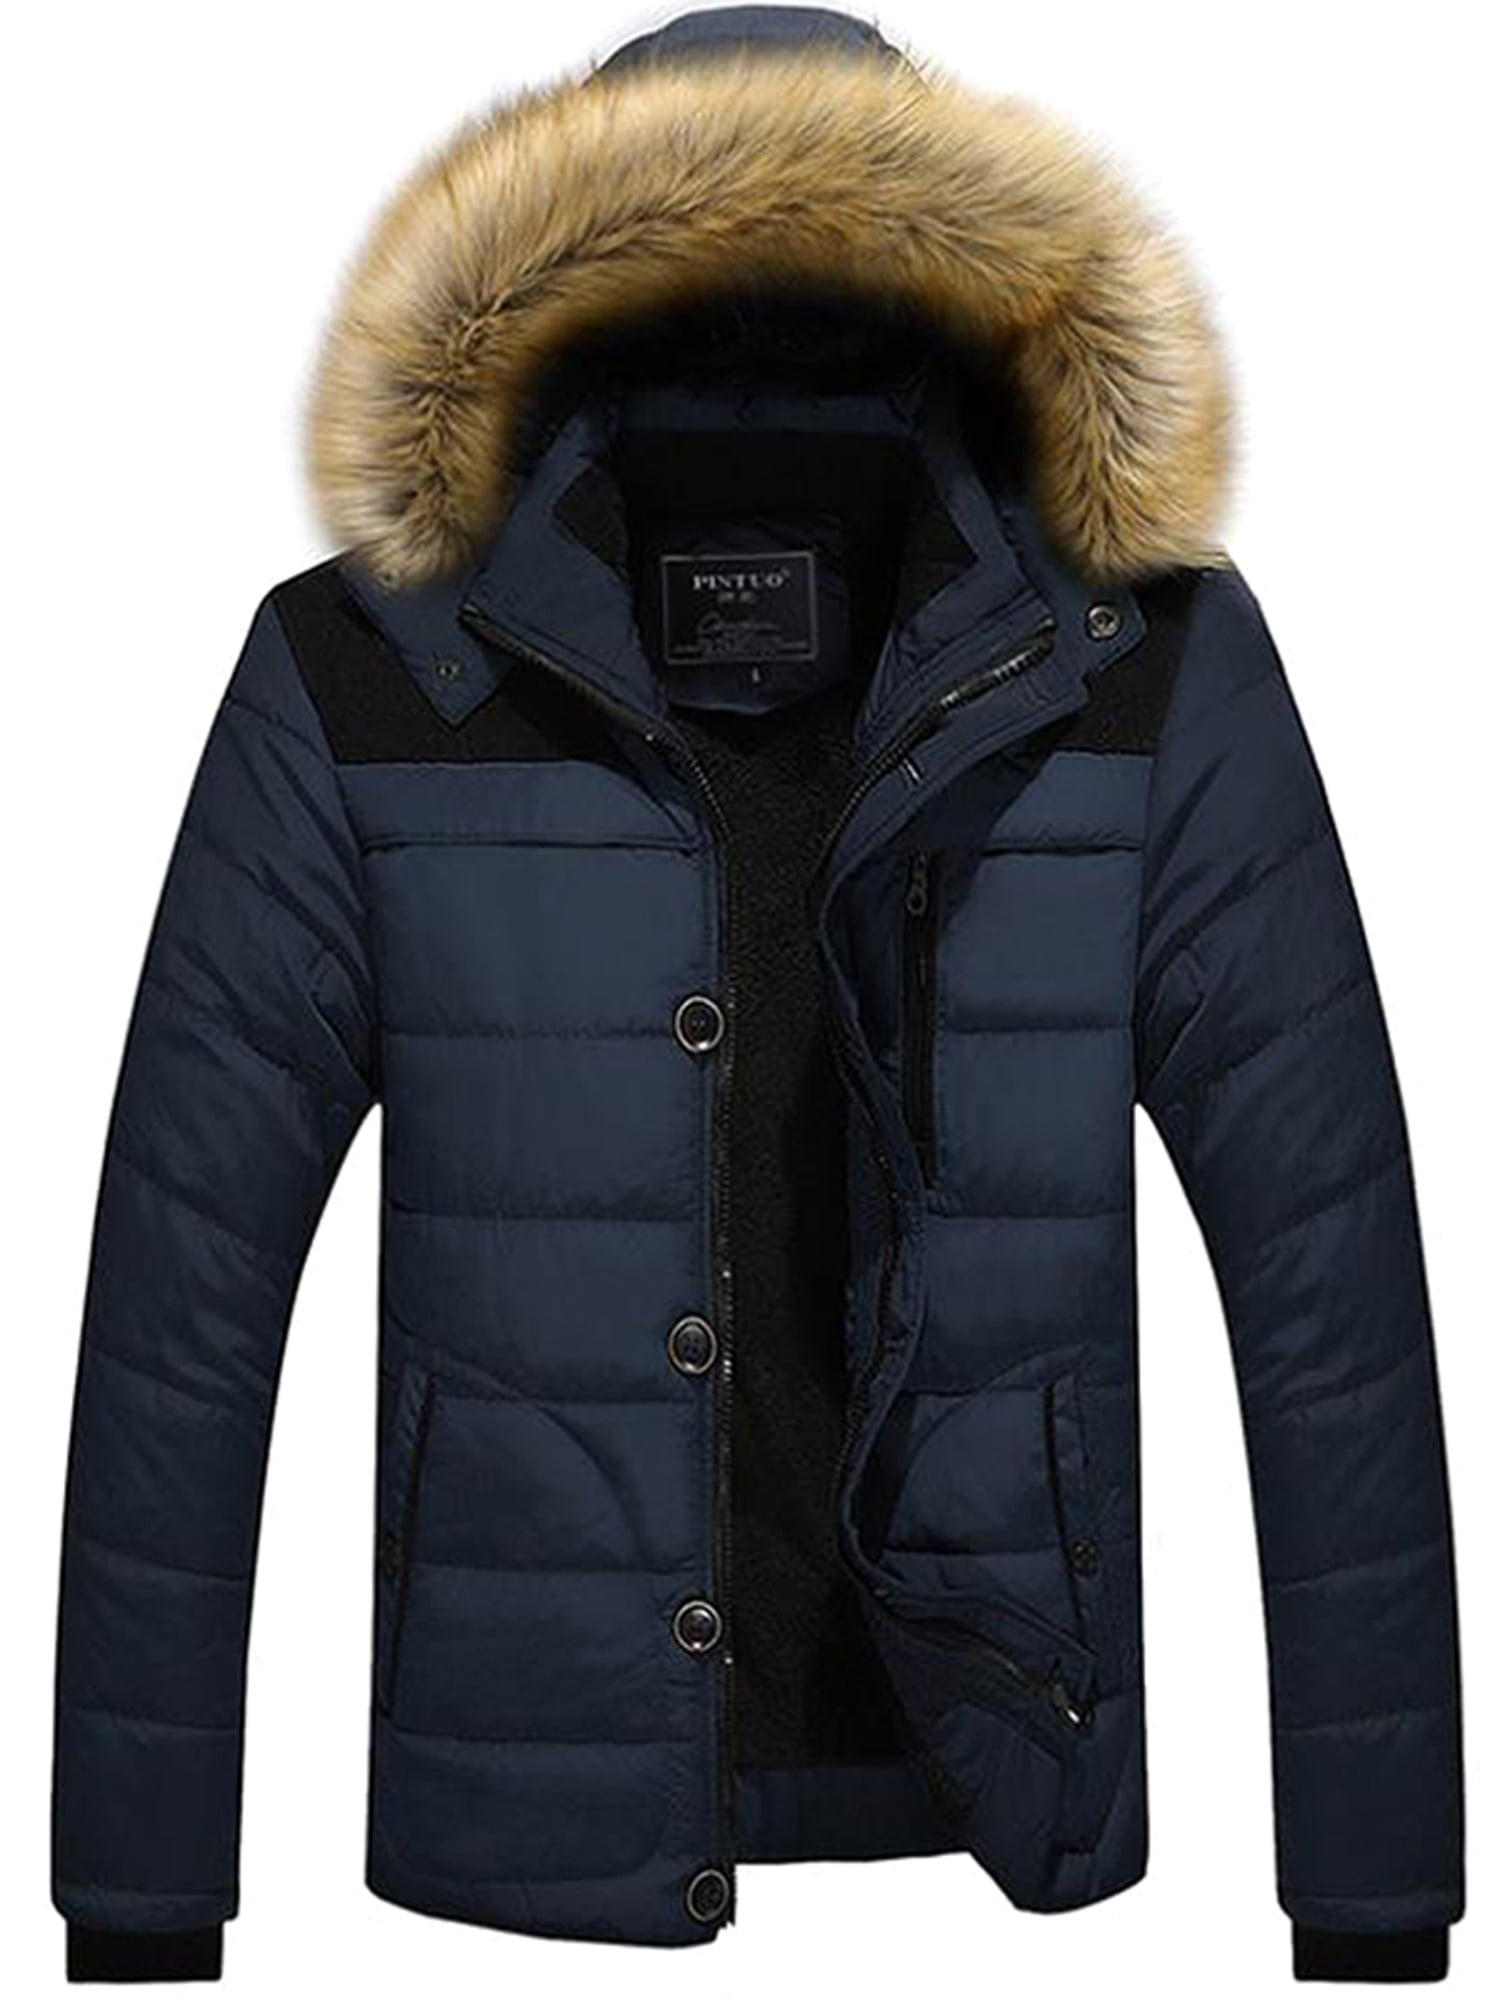 Fubotevic Mens Parkas Winter Plus Size Hoodie Down Quilted Puffer Jacket Coat Outerwear